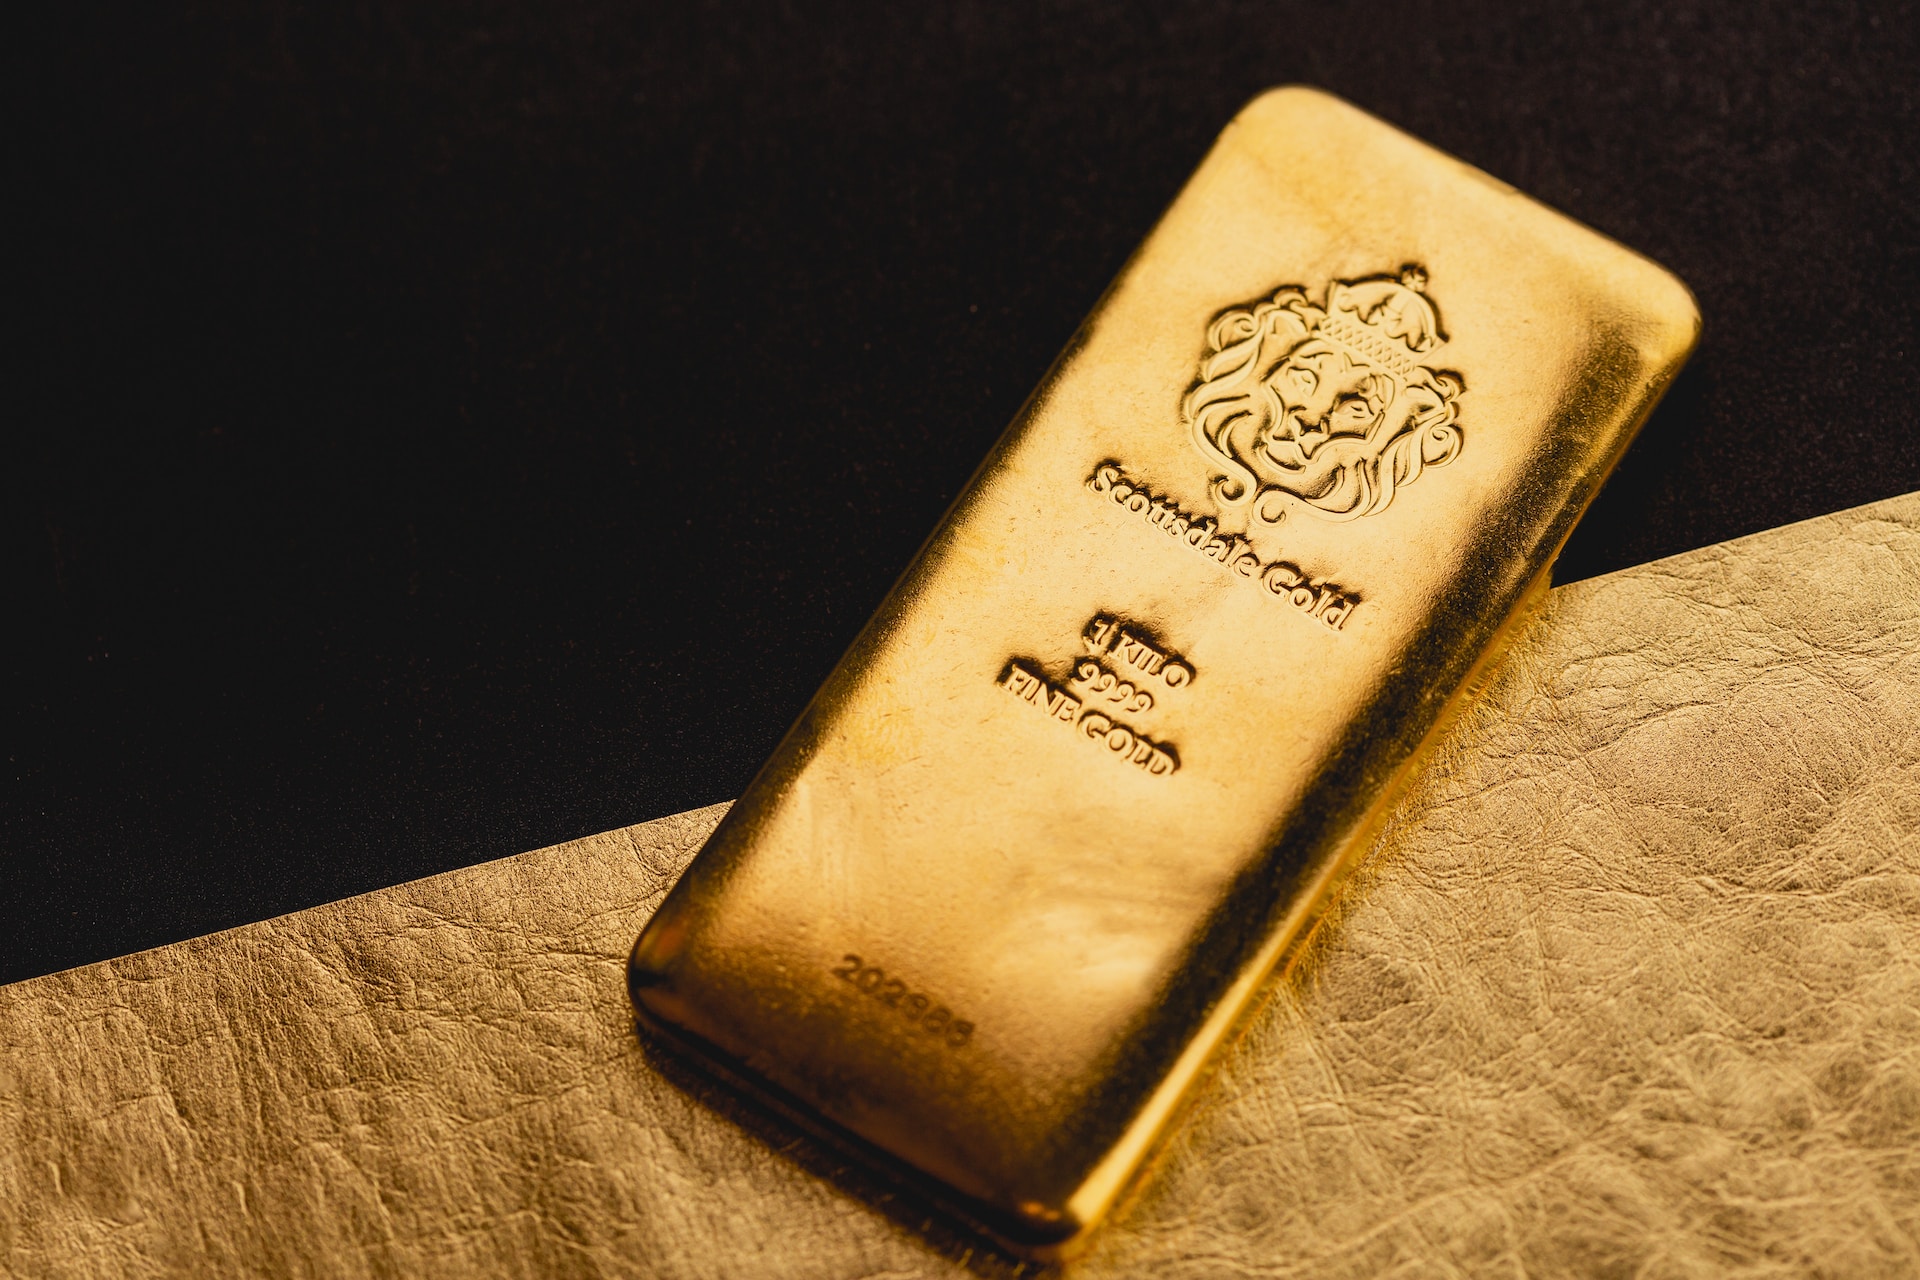 Investing in Precious Metals: Methods, Risks, and Benefits